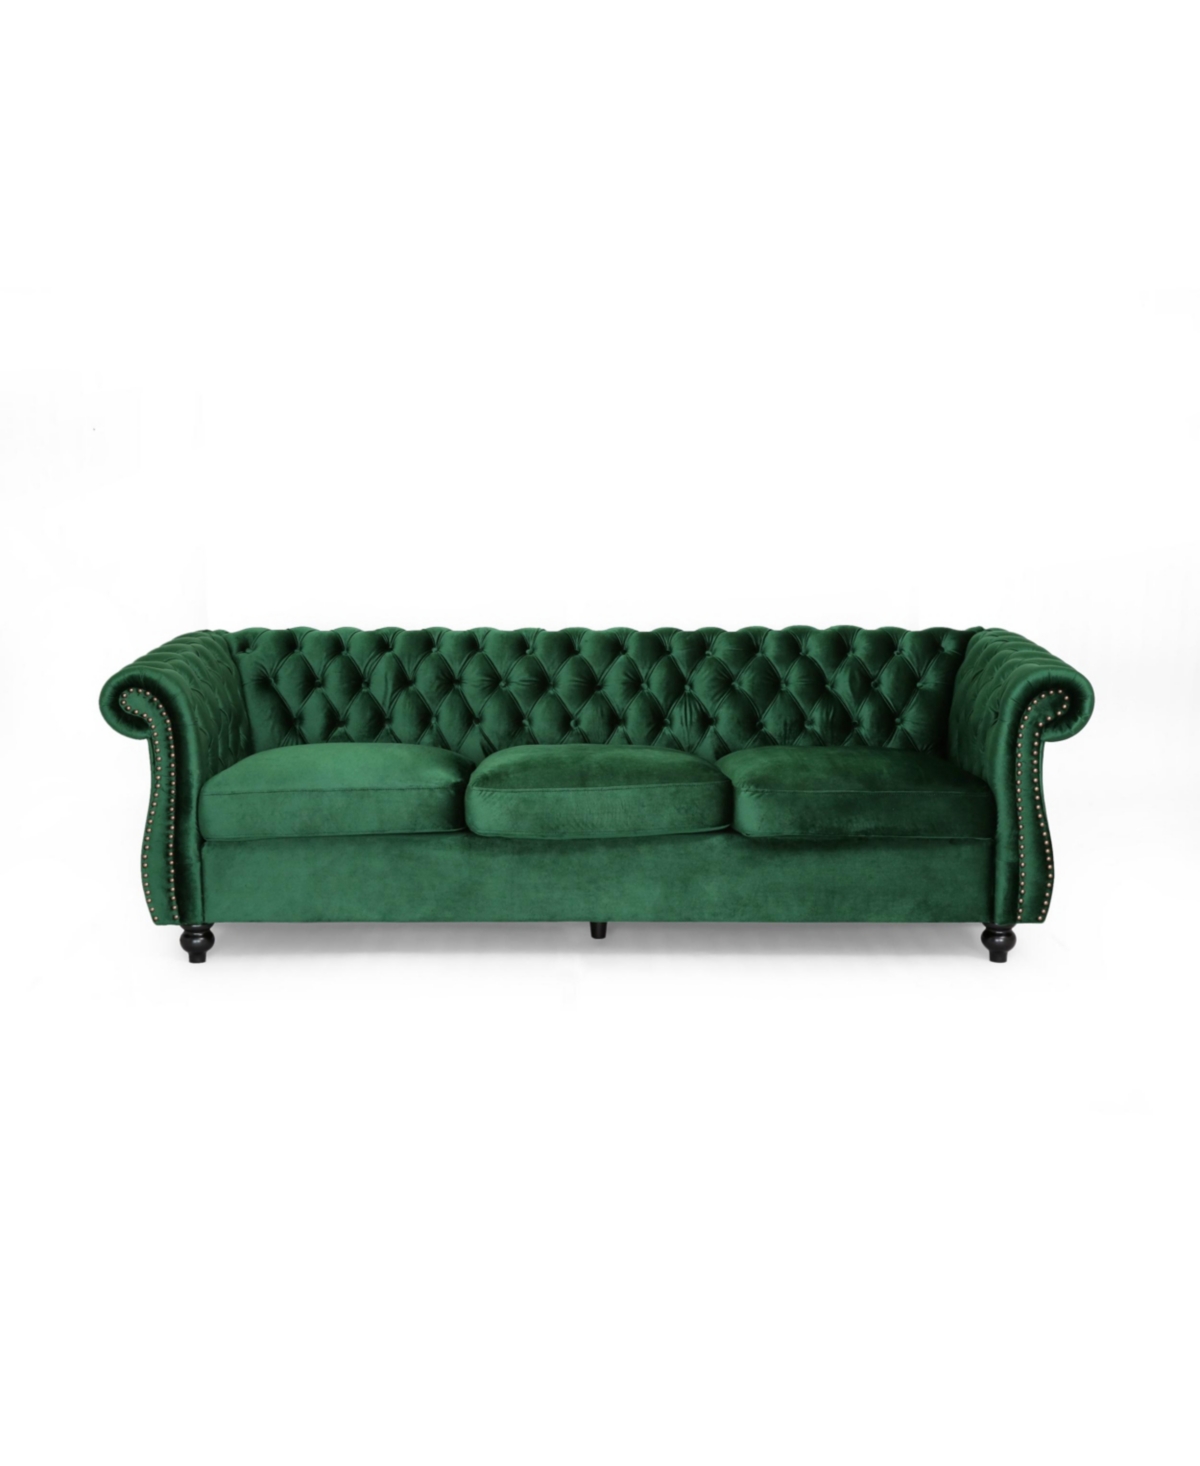 Noble House Somerville Chesterfield Tufted Jewel Toned Sofa With Scroll Arms In Emerald